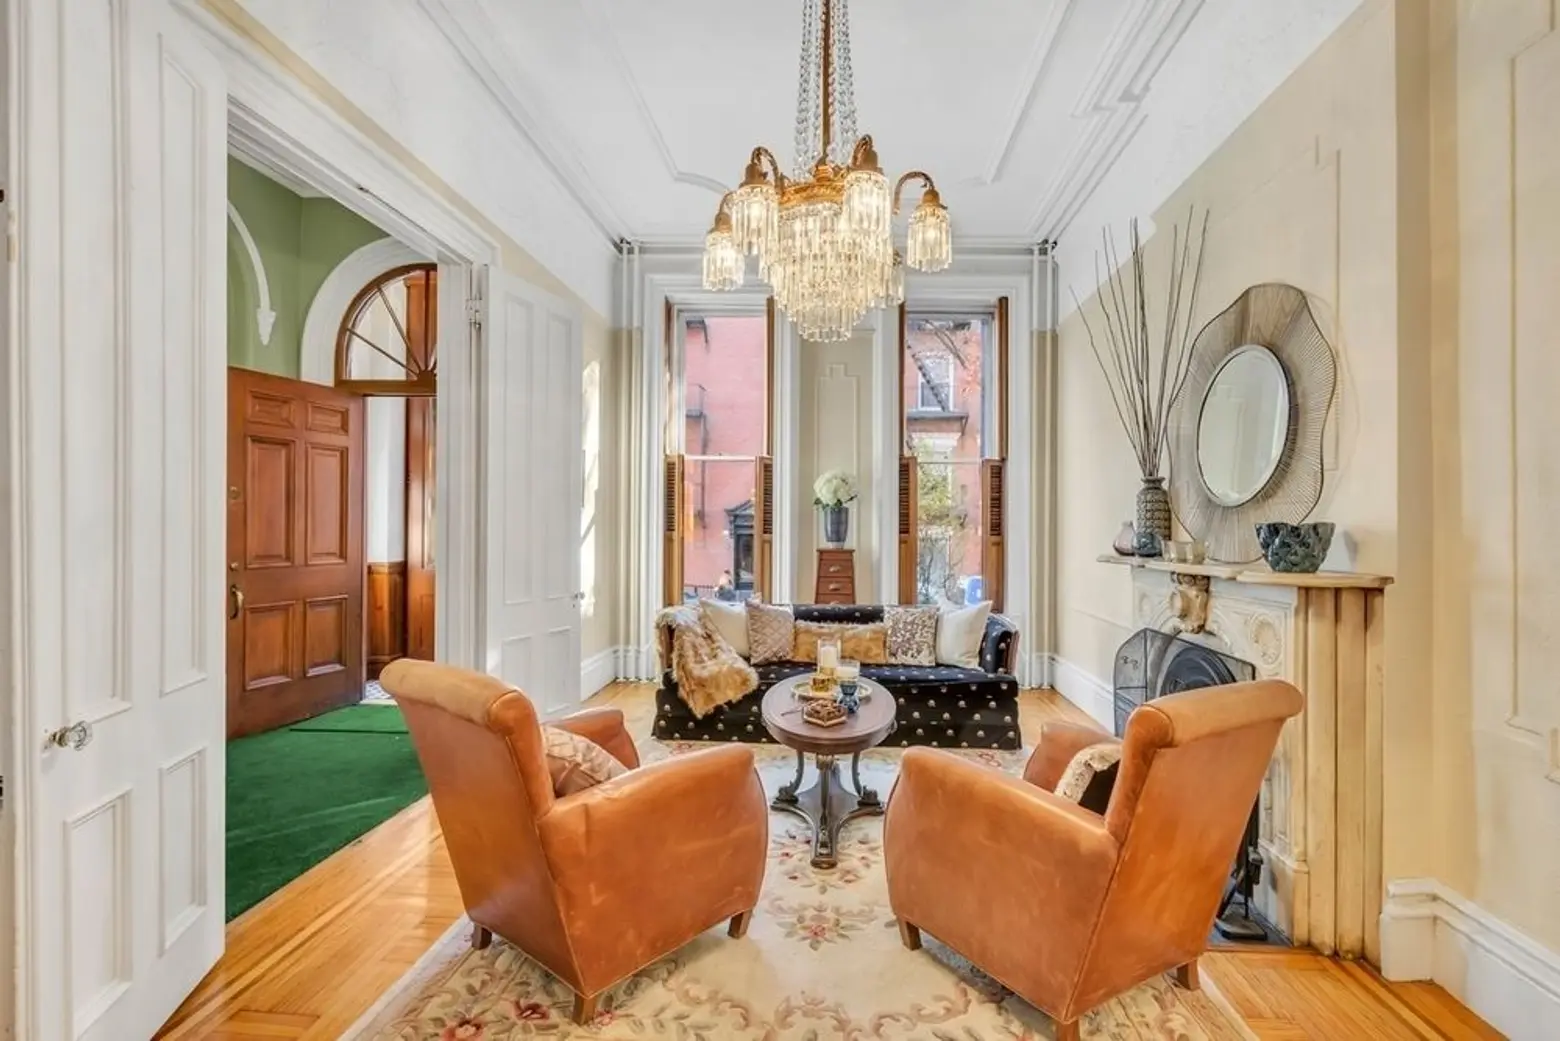 This $3.7M Cobble Hill townhouse is period-perfect with rooms to spare and harbor views